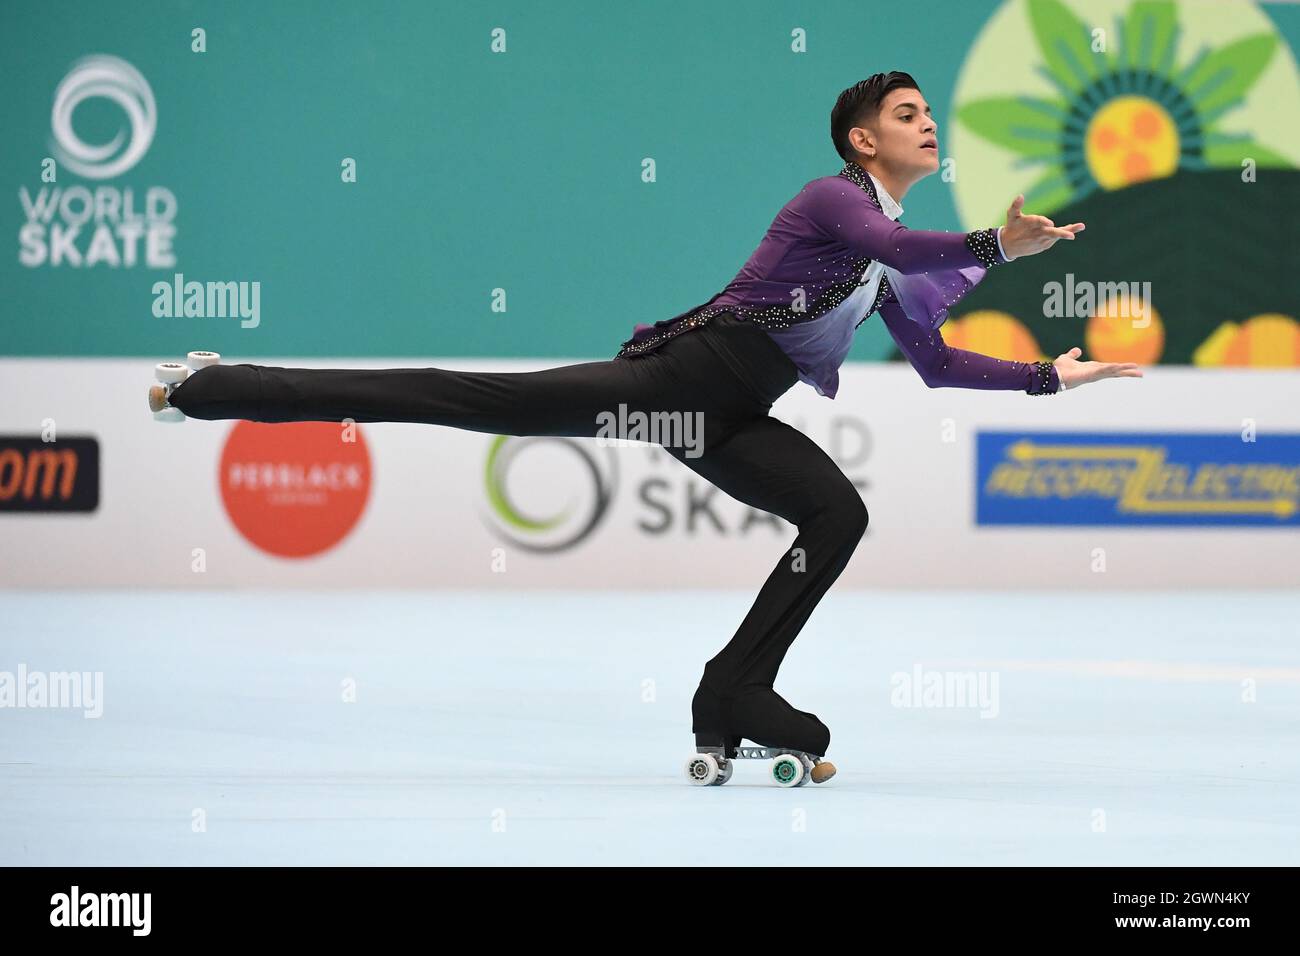 JUAN JOSE PINO BENITEZ, Colombia, performing in Junior Solo Dance - Style Dance at Artistic Skating World Championships 2021 at Polideportivo SND Arena, on October 01, 2021 in Asuncin, Paraguay. Credit: Raniero Corbelletti/AFLO/Alamy Live News Stock Photo